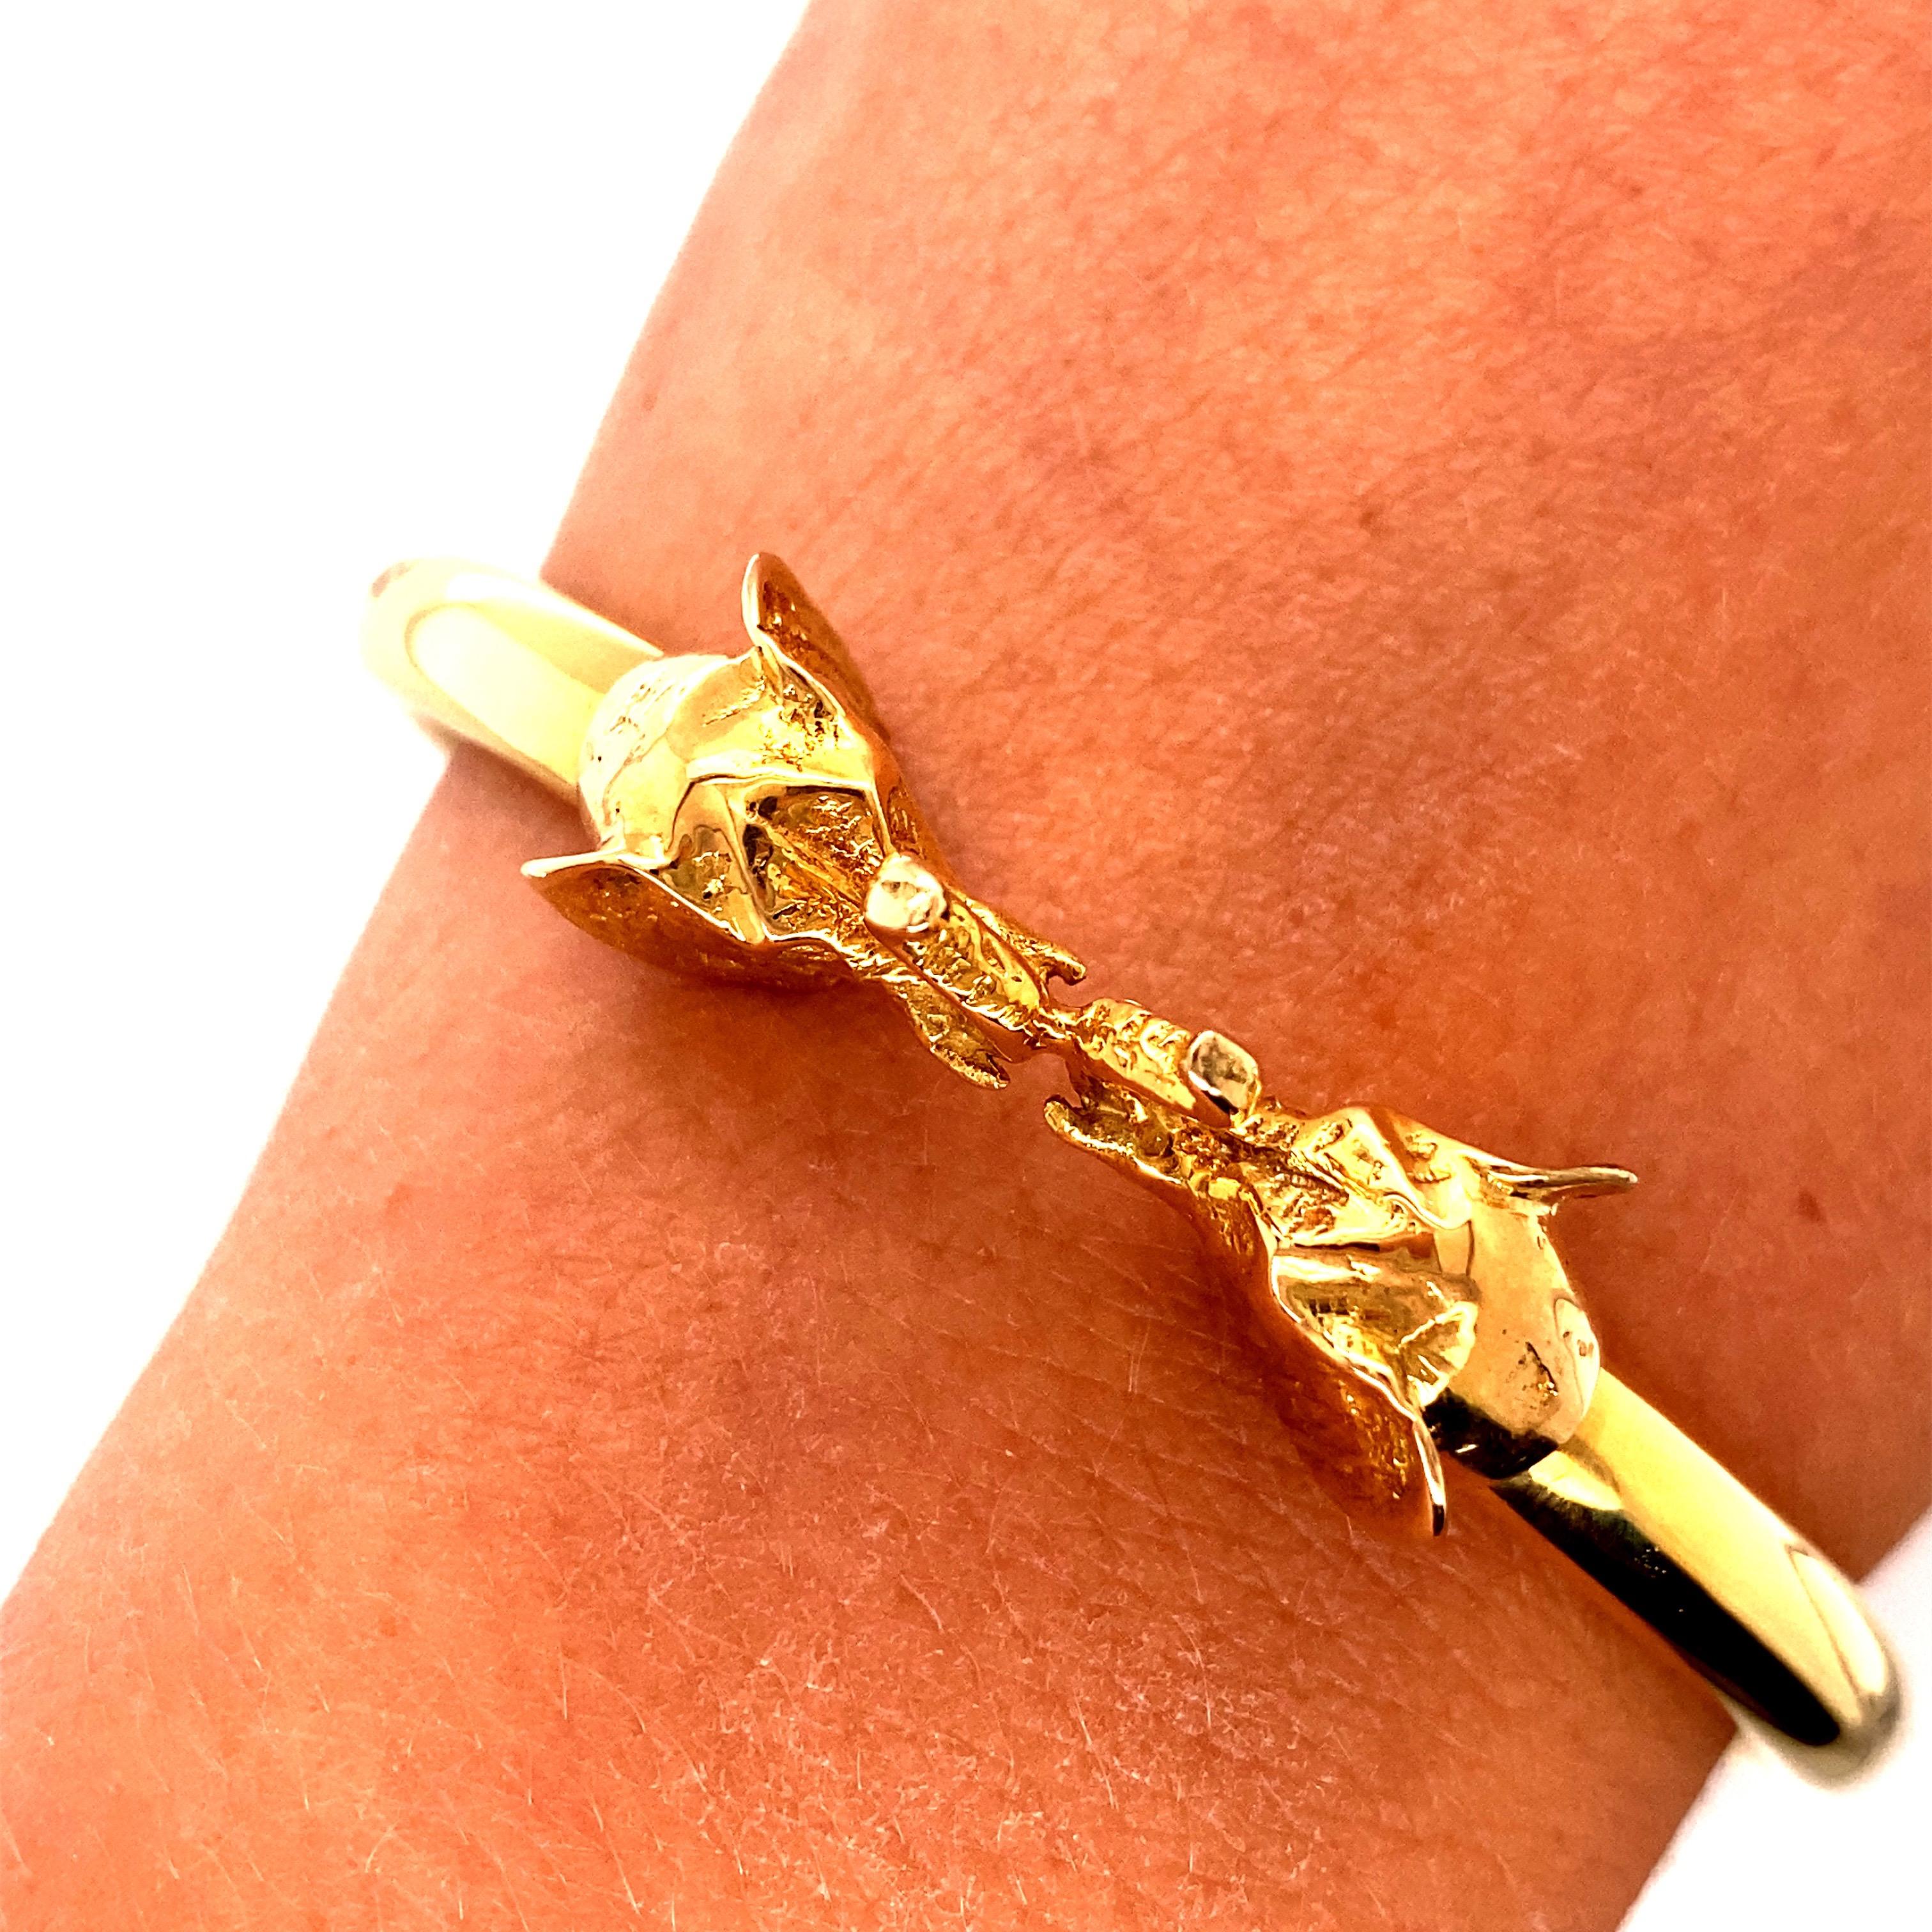 Vintage 18K Yellow Gold Elephant Bangle Bracelet - The width of the bangle is 5.1mm. The inside diameter is 2.4 inches. The bracelet weighs 27 grams.